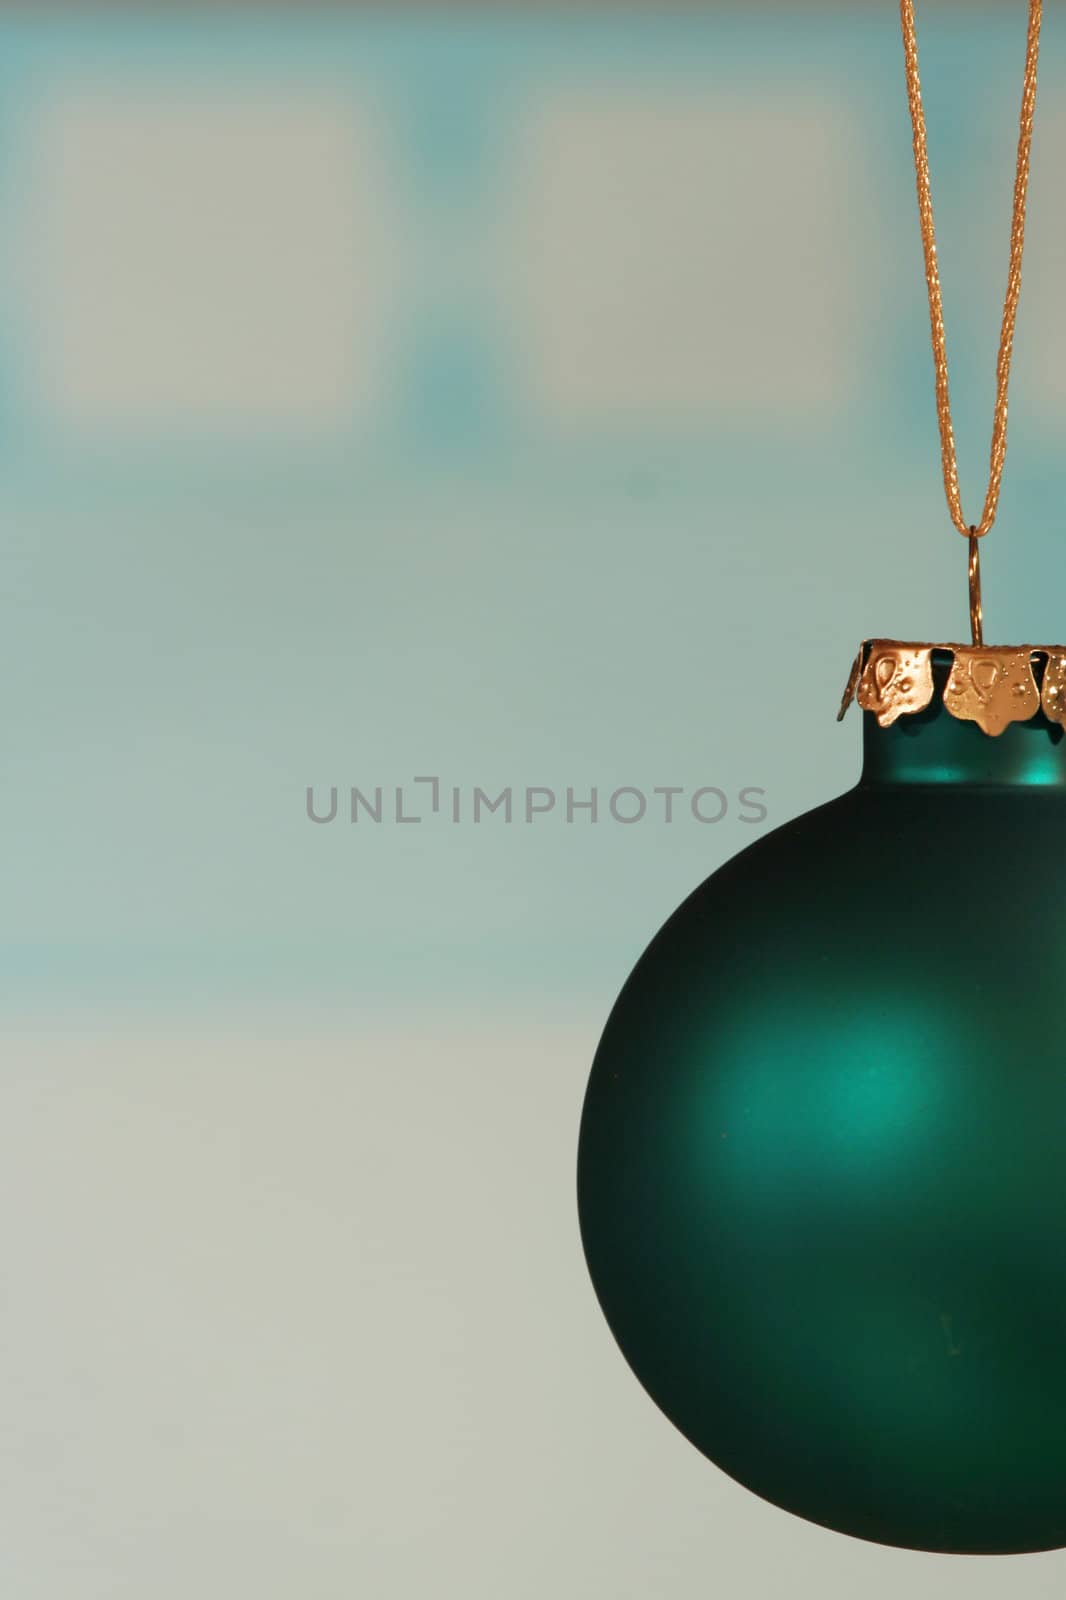 Teal green ornament on light blue background.